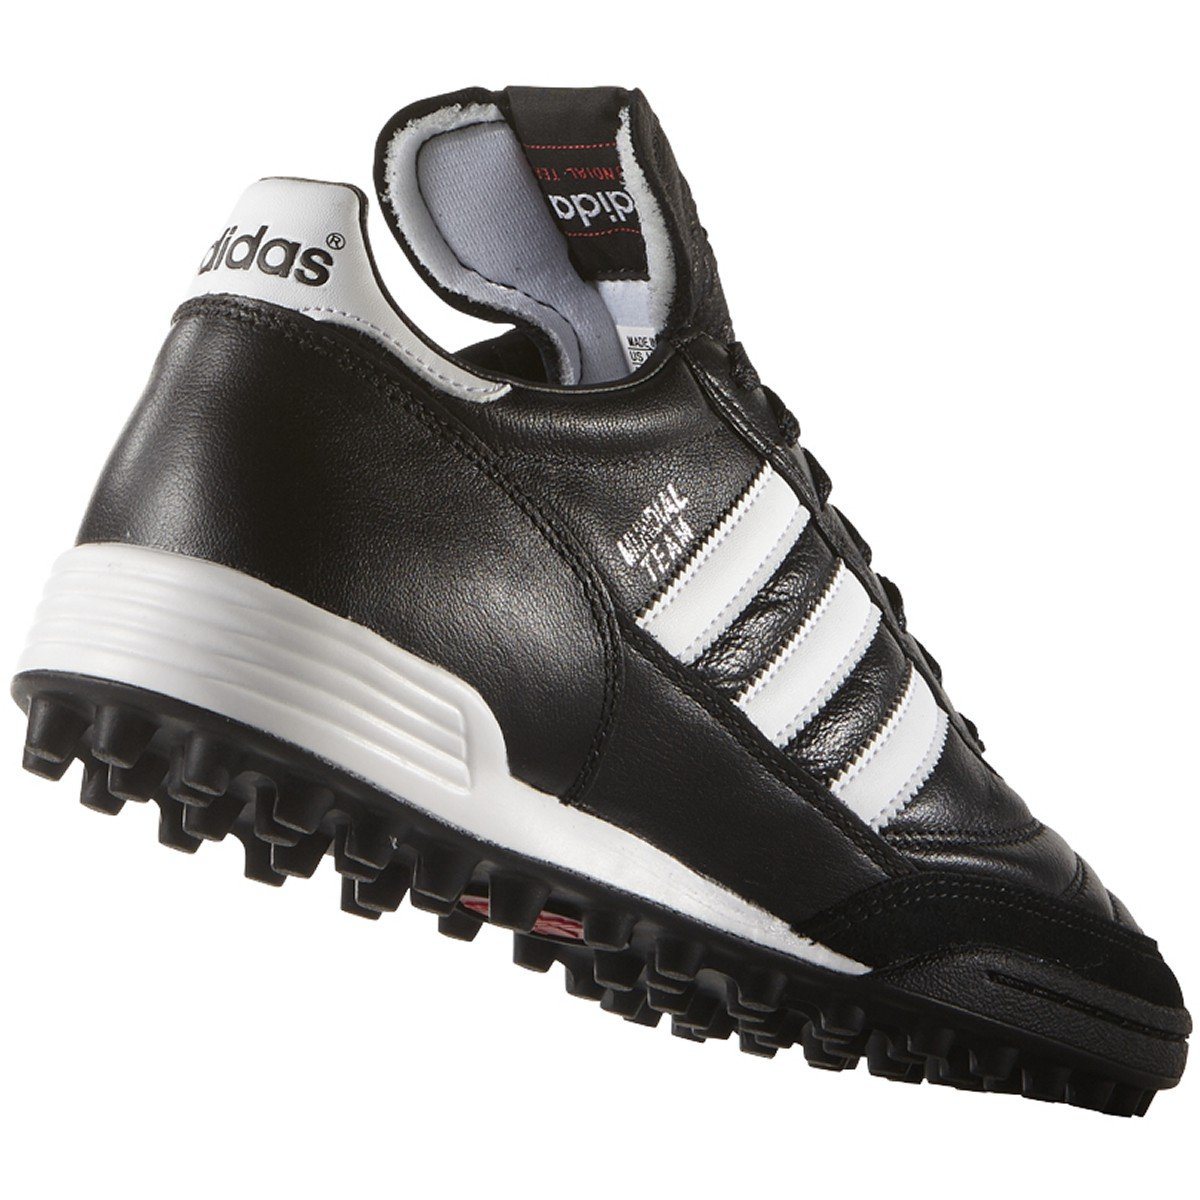 Adidas Mundial Team Leather Soccer Turf Cleats |